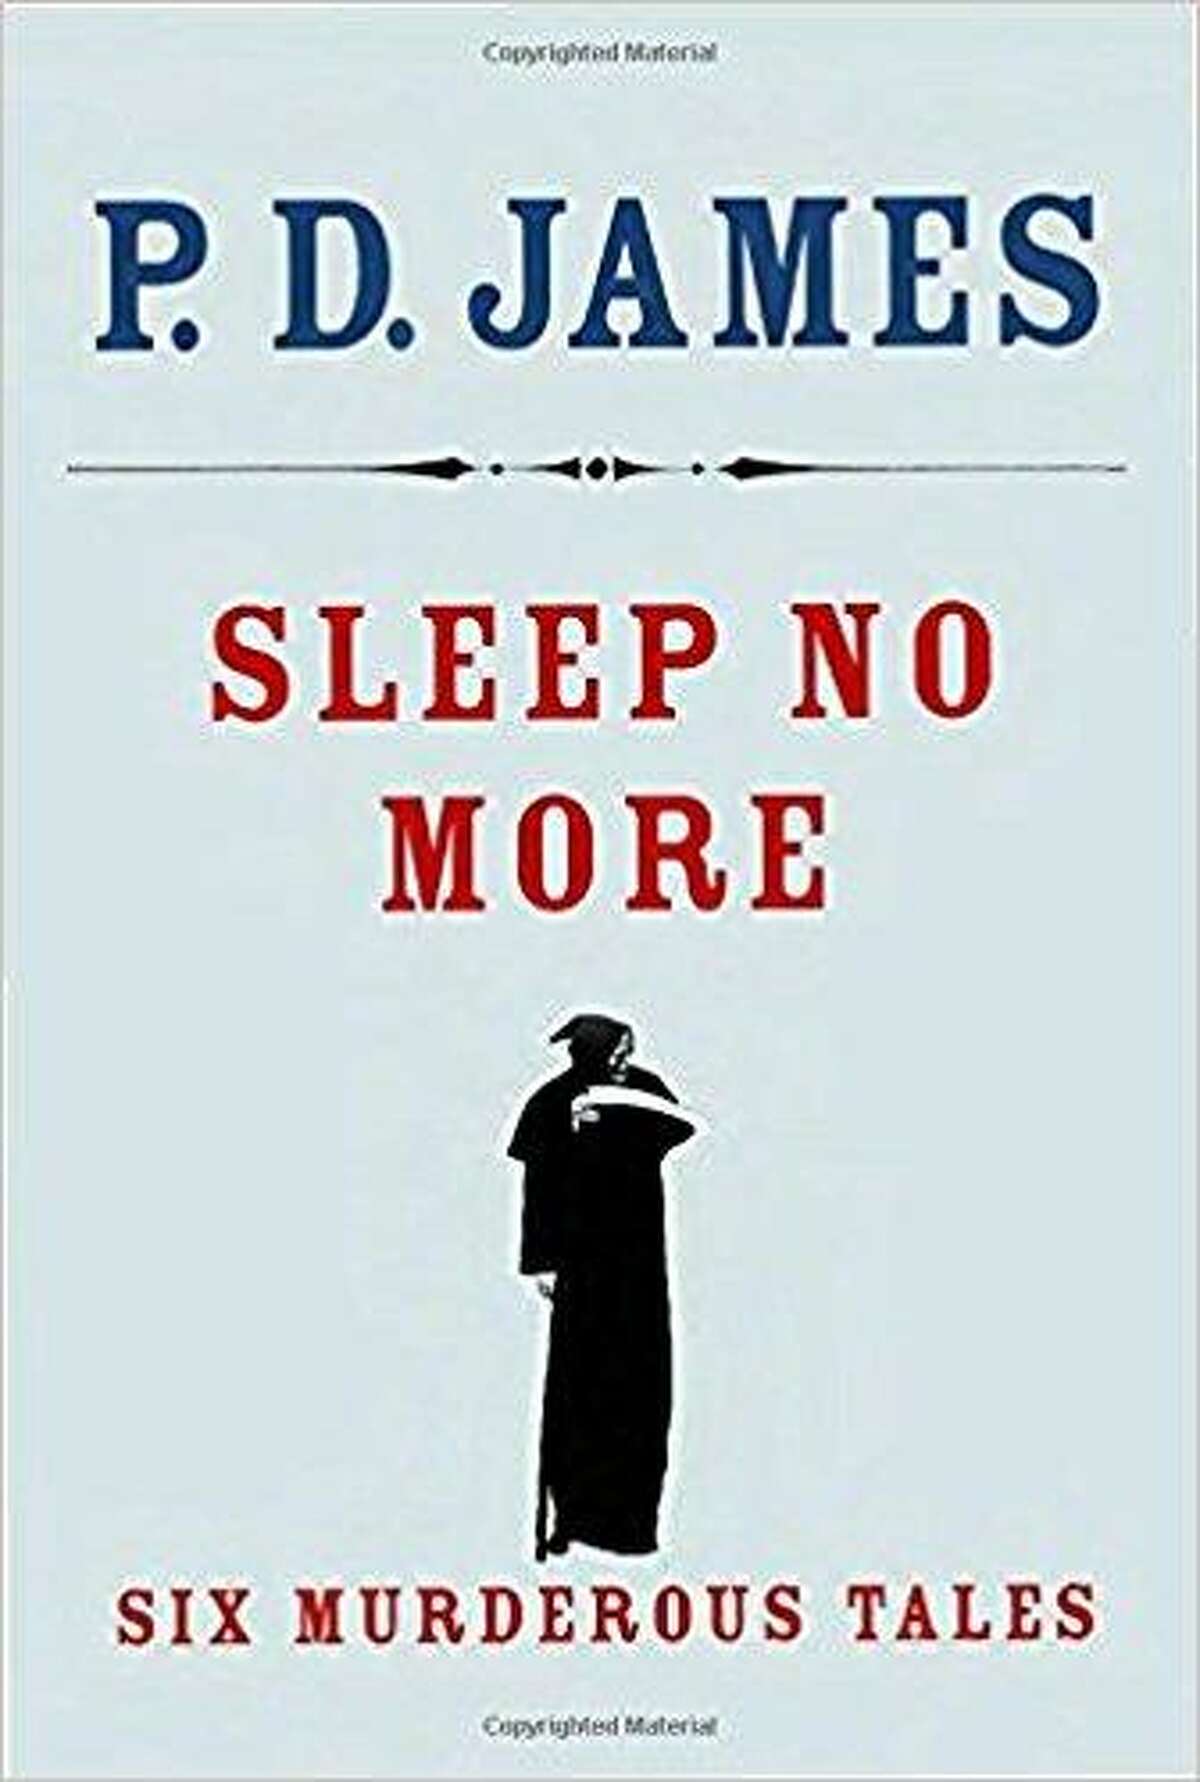 “Sleep No More” by P.D. James